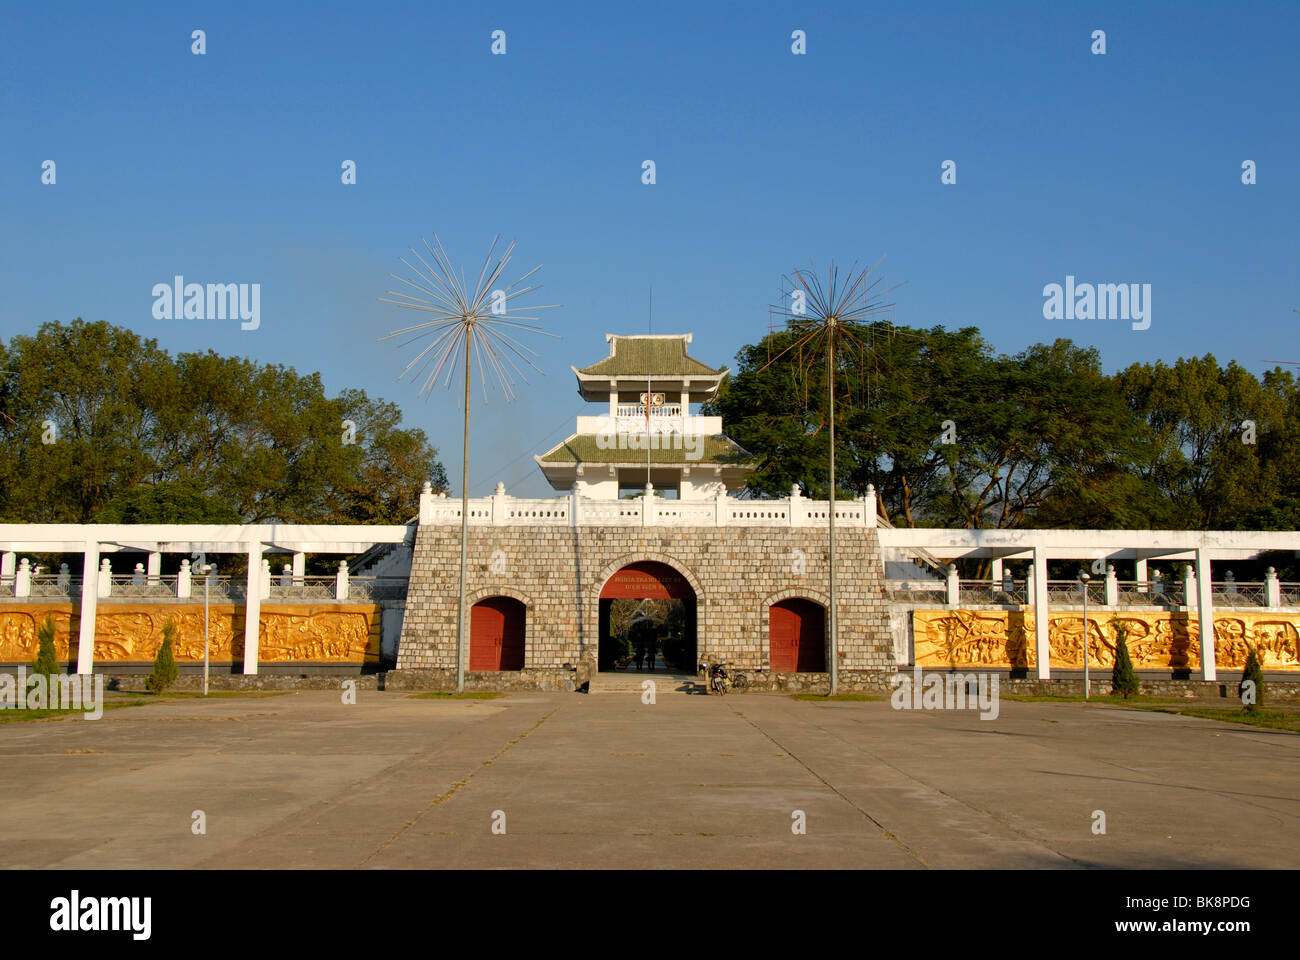 First Indochina War 1954, entrance to the cemetery of the fallen soldiers of the Viet Minh, Dien Bien Phu, Vietnam, Southeast A Stock Photo